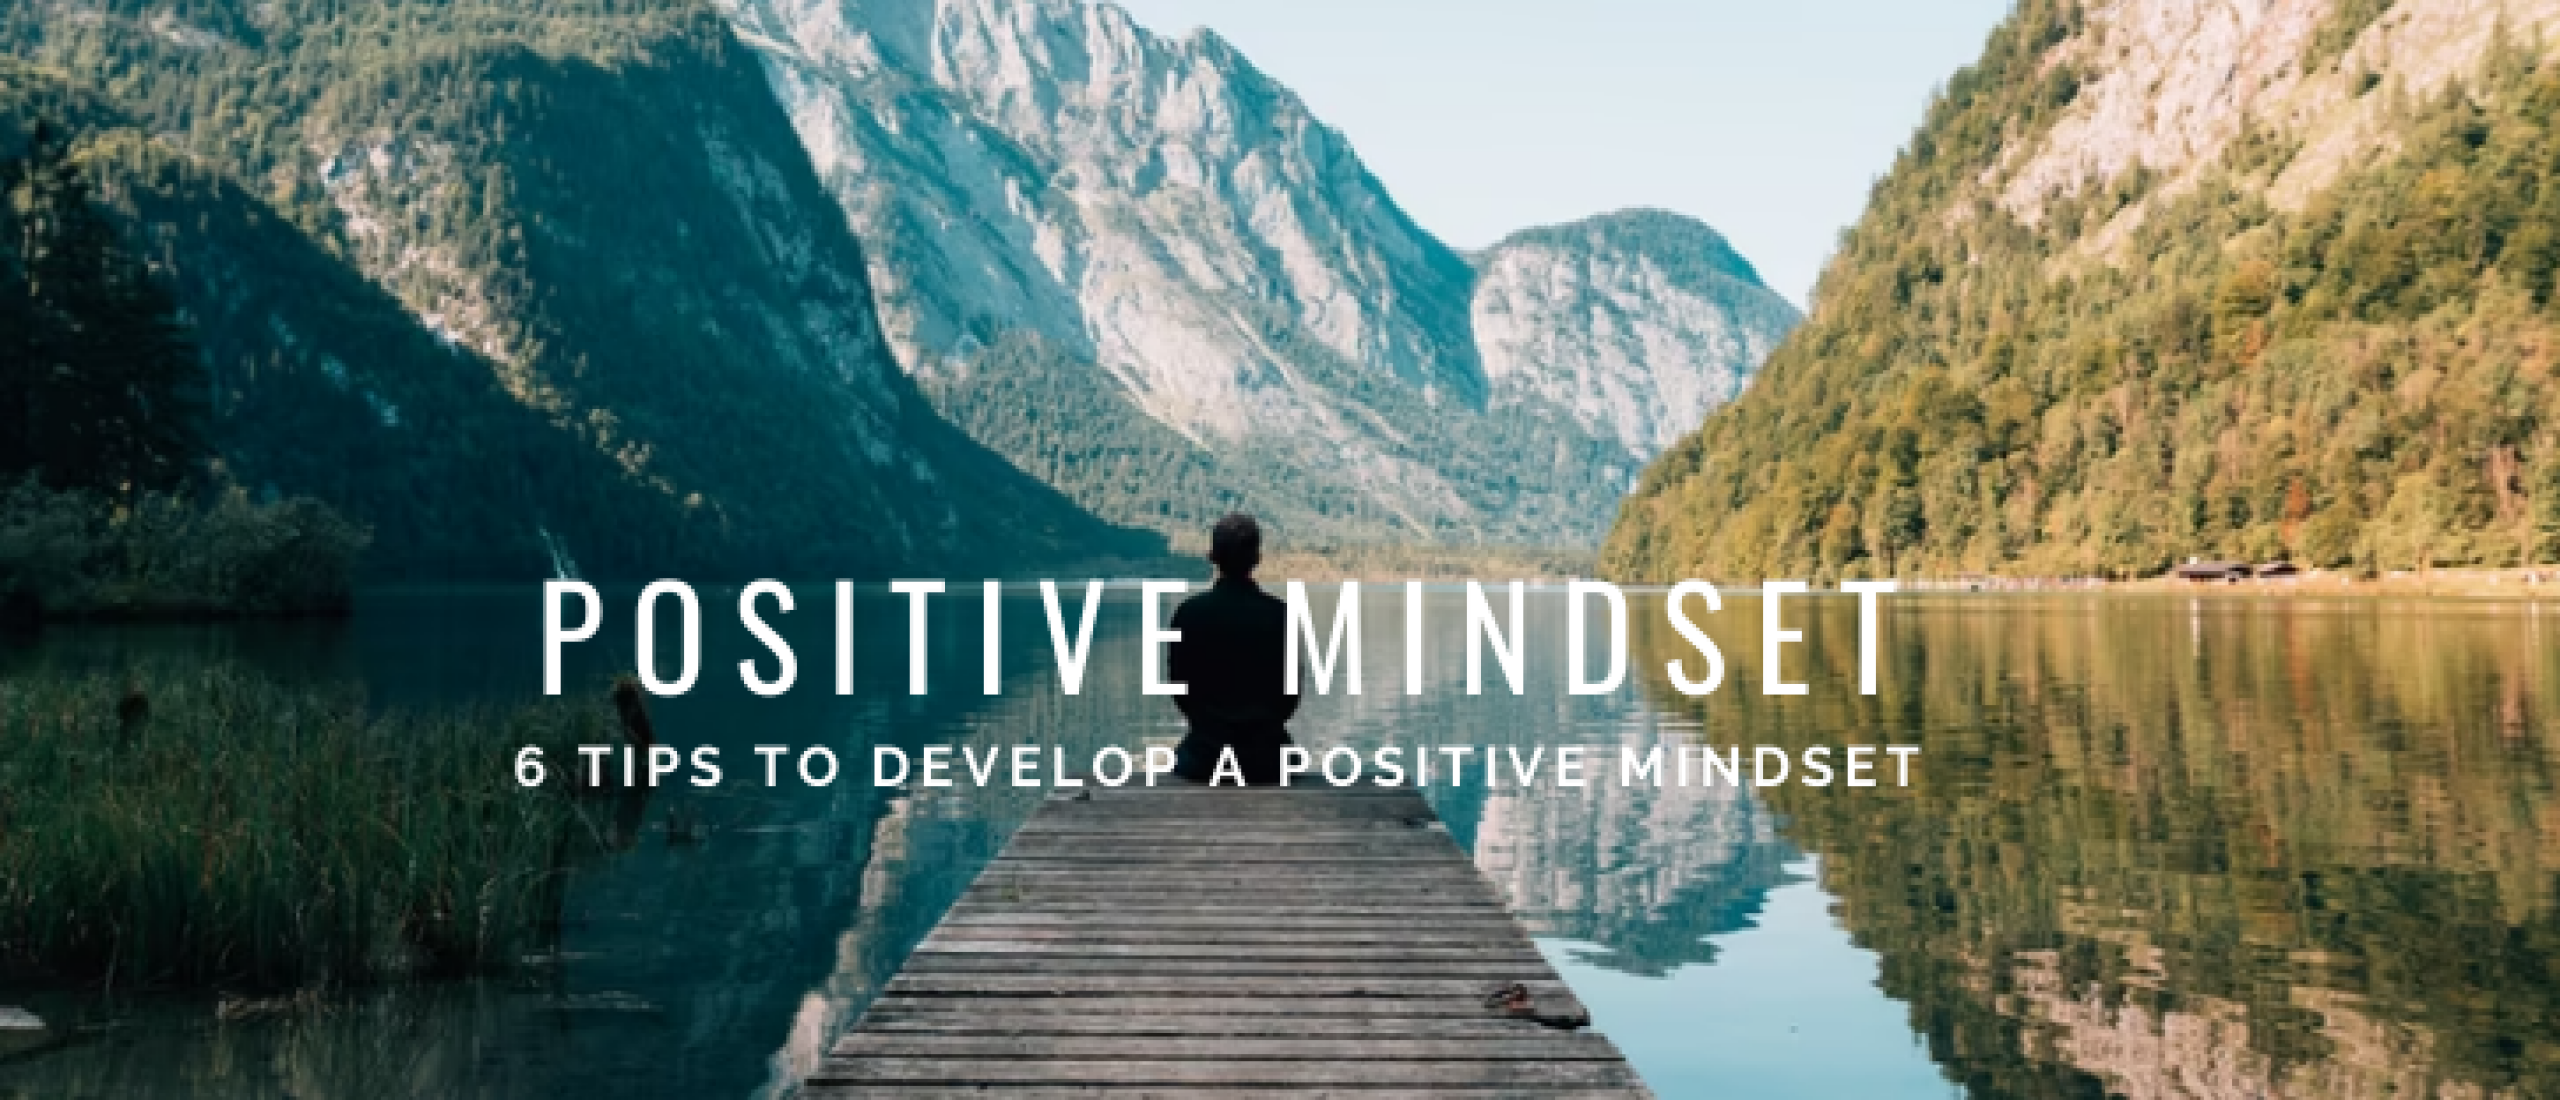 How to Develop a Positive Mindset: 6 Tips that work